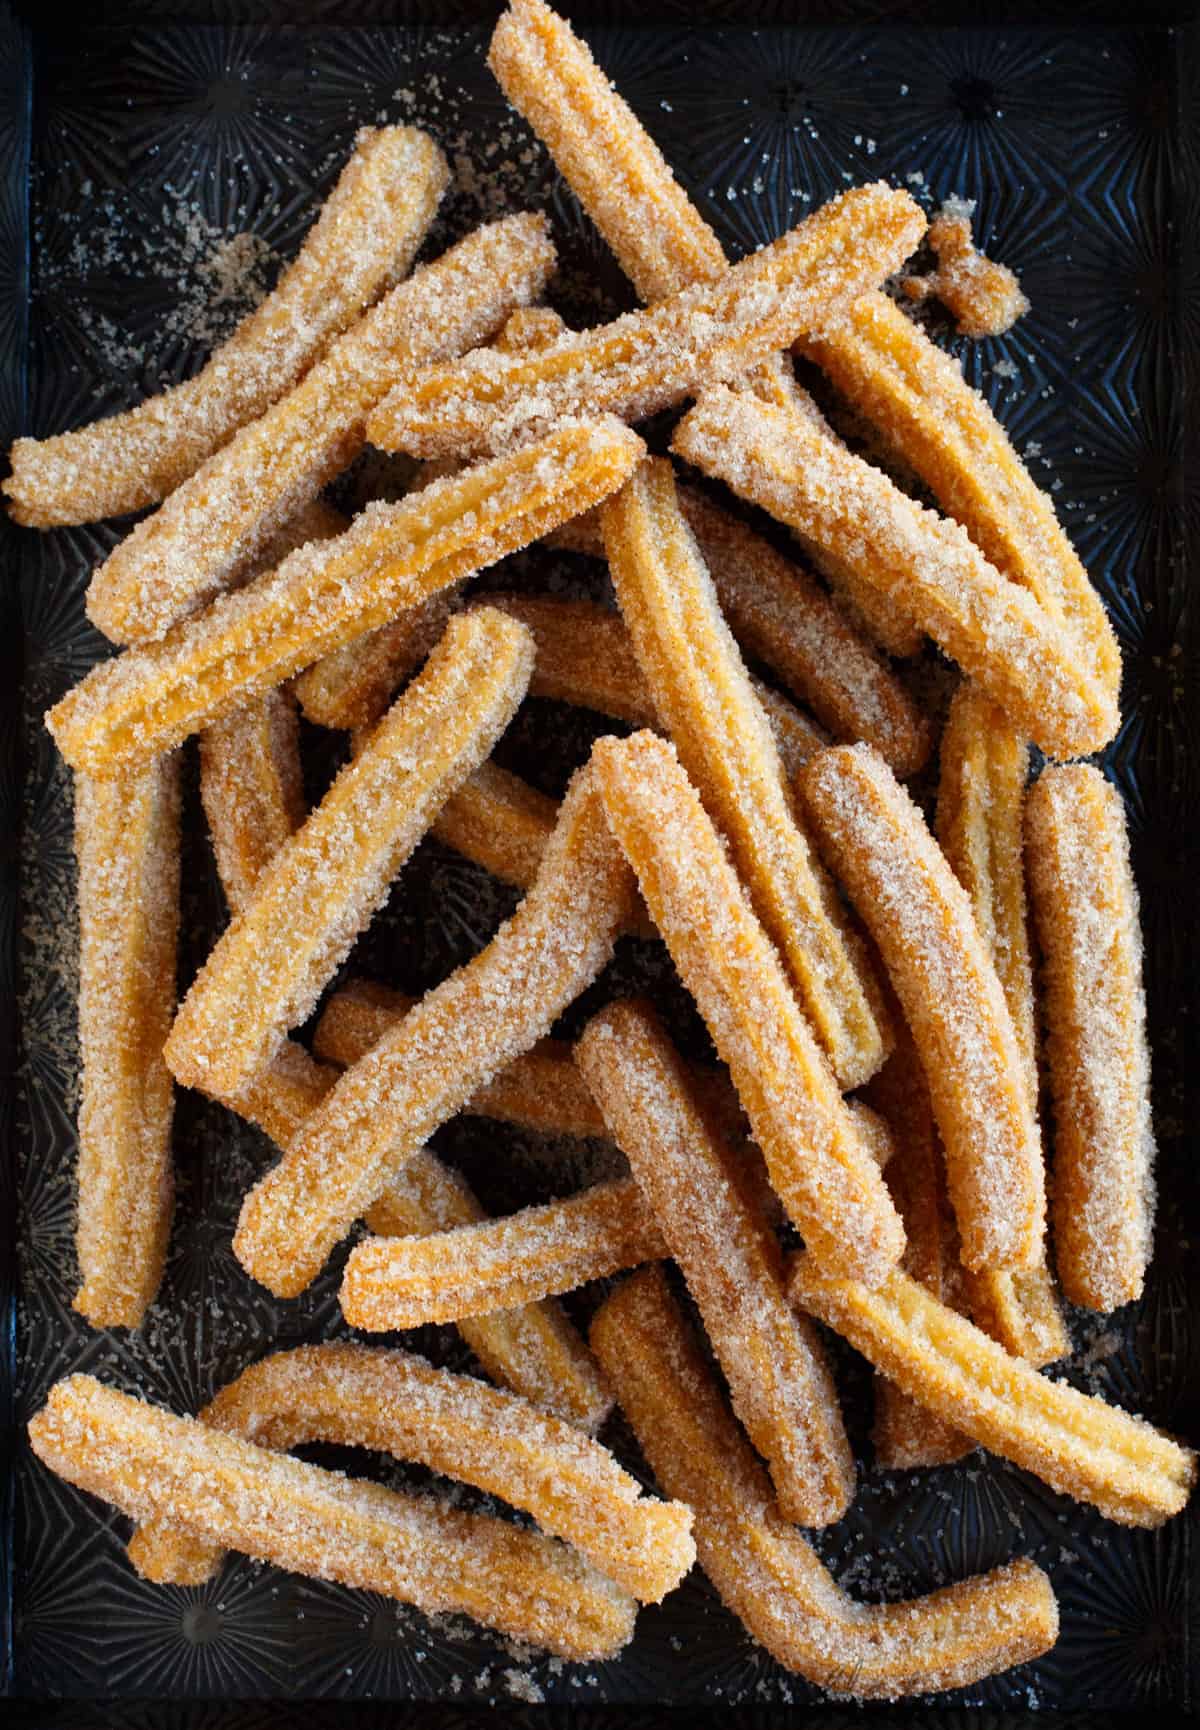 Making homemade Mexican churros is easier than you think! These cinnamon sugary fried dough of goodness will transport you right to Mexico without the cost of airfare ;)